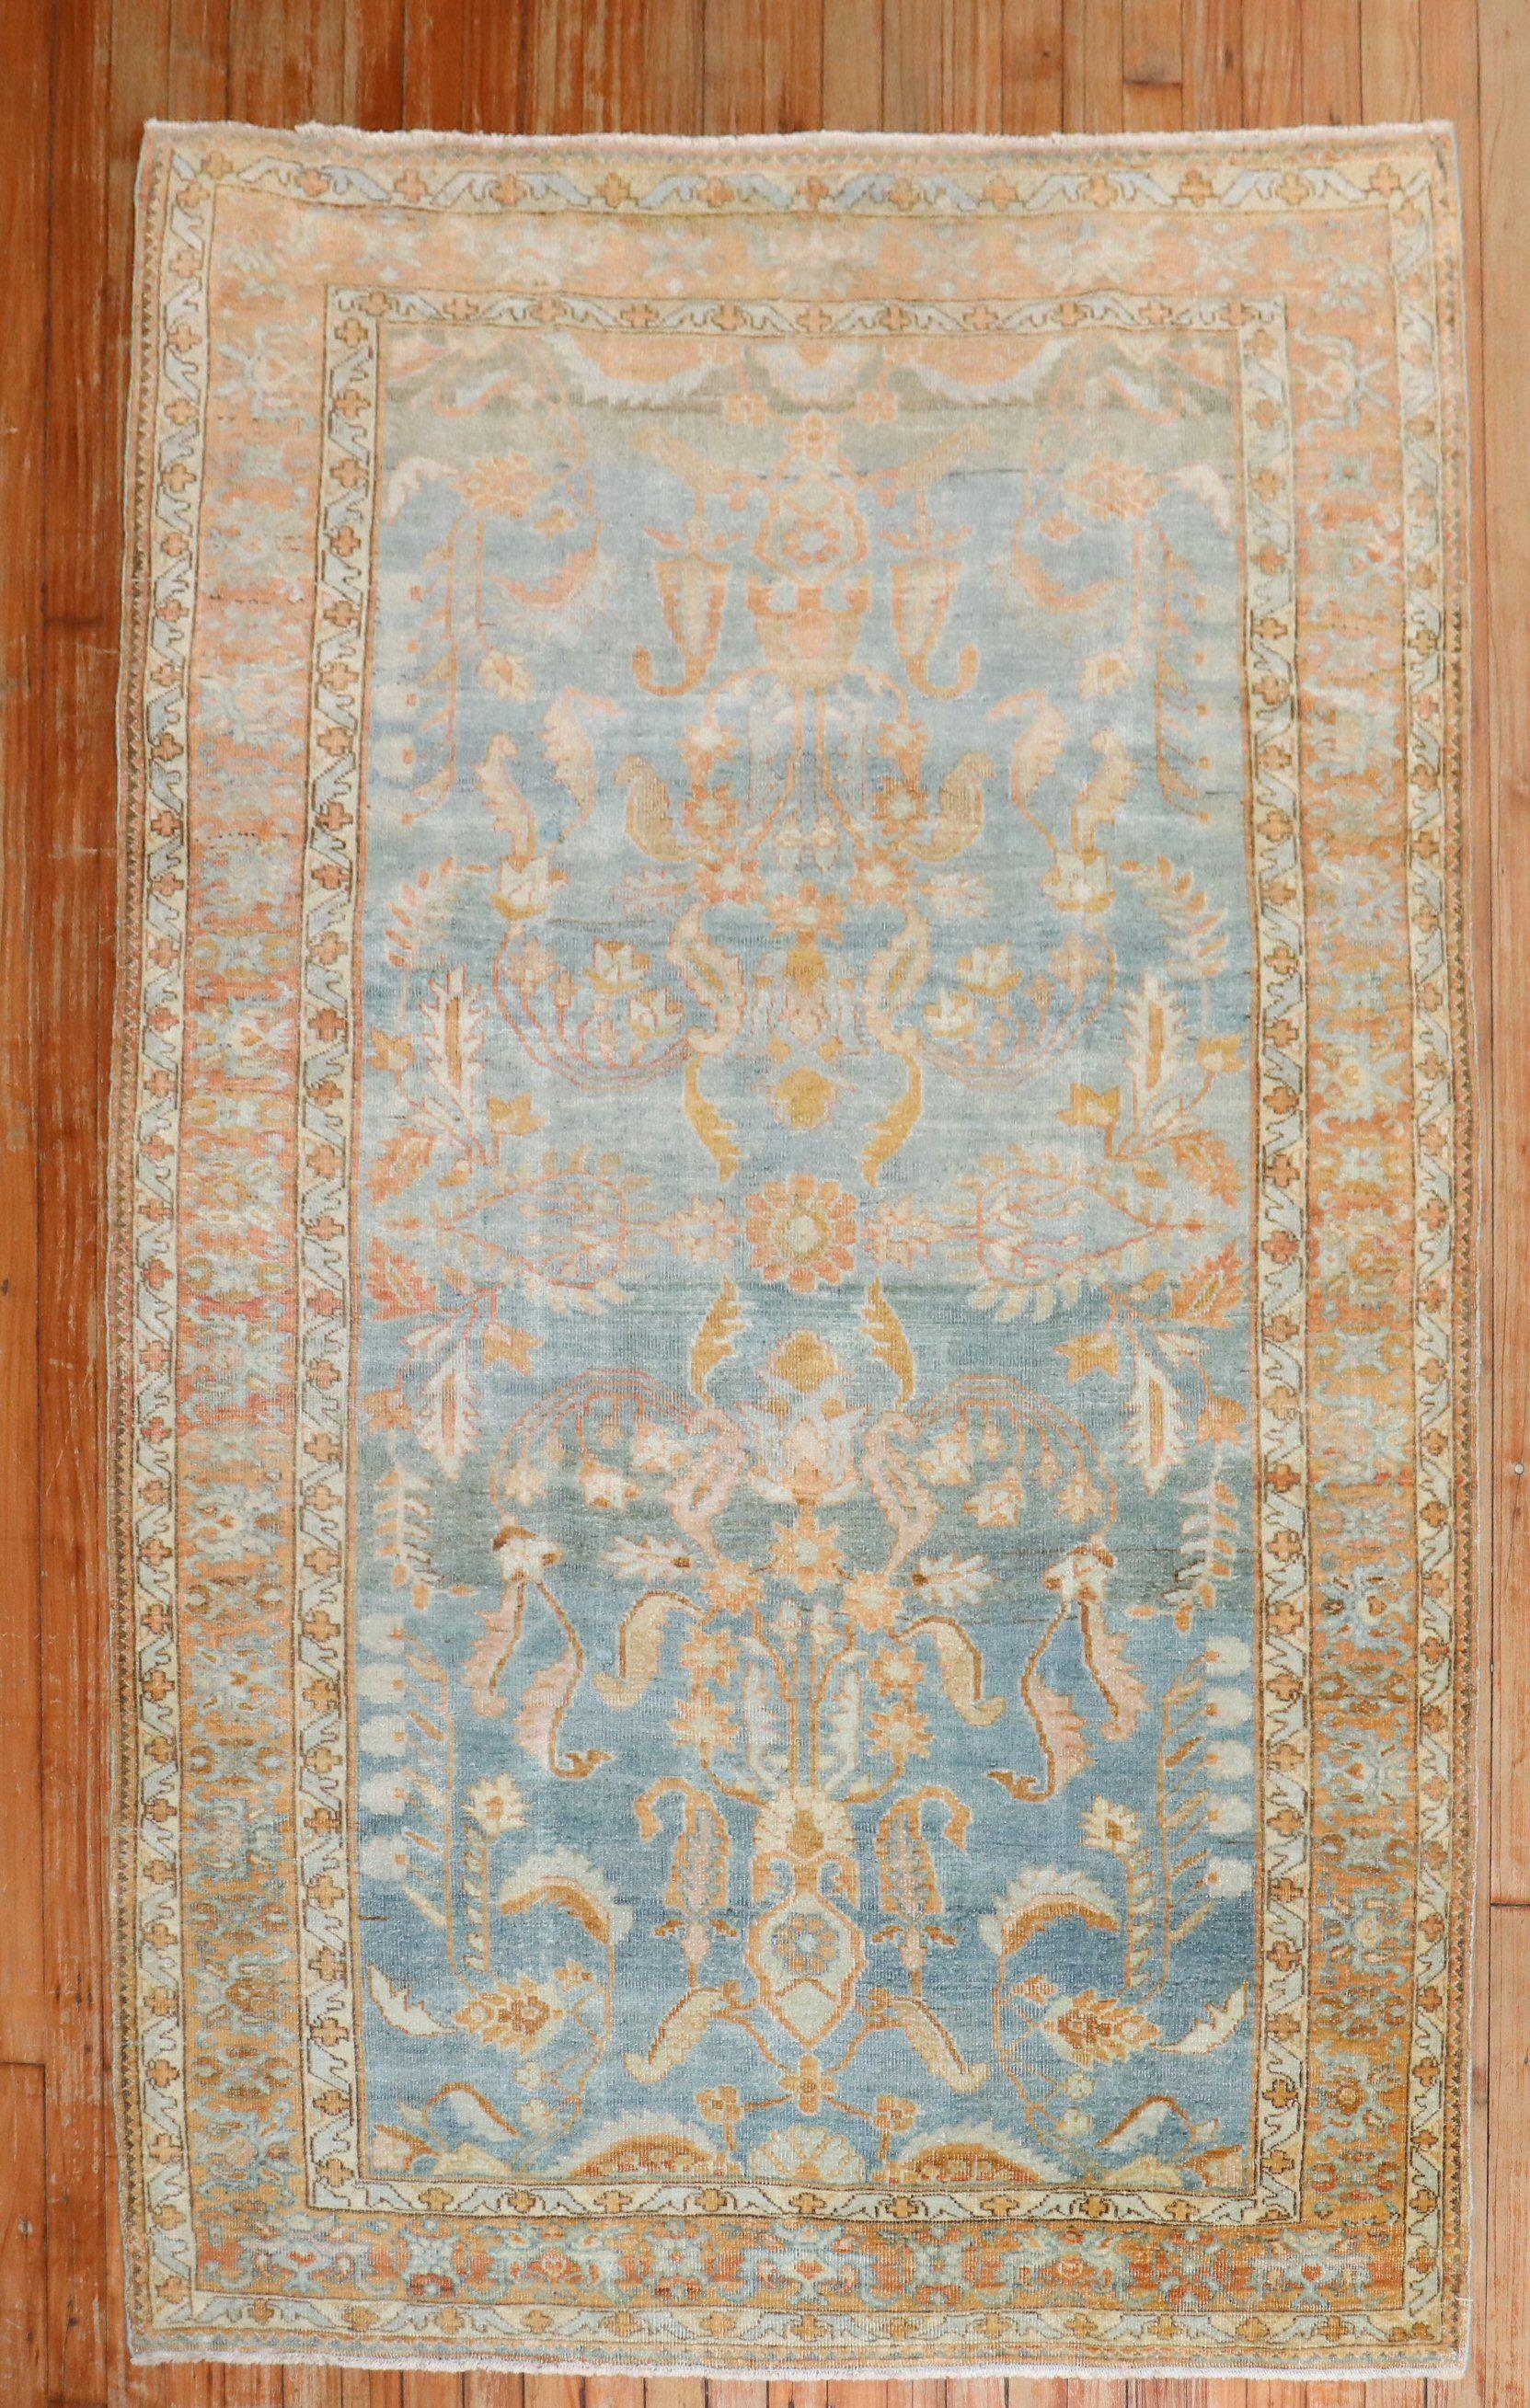 1920s Persian Sarouk Accent size rug with a sky blue field accents in peach
Rug no. j3135
size 4' 3